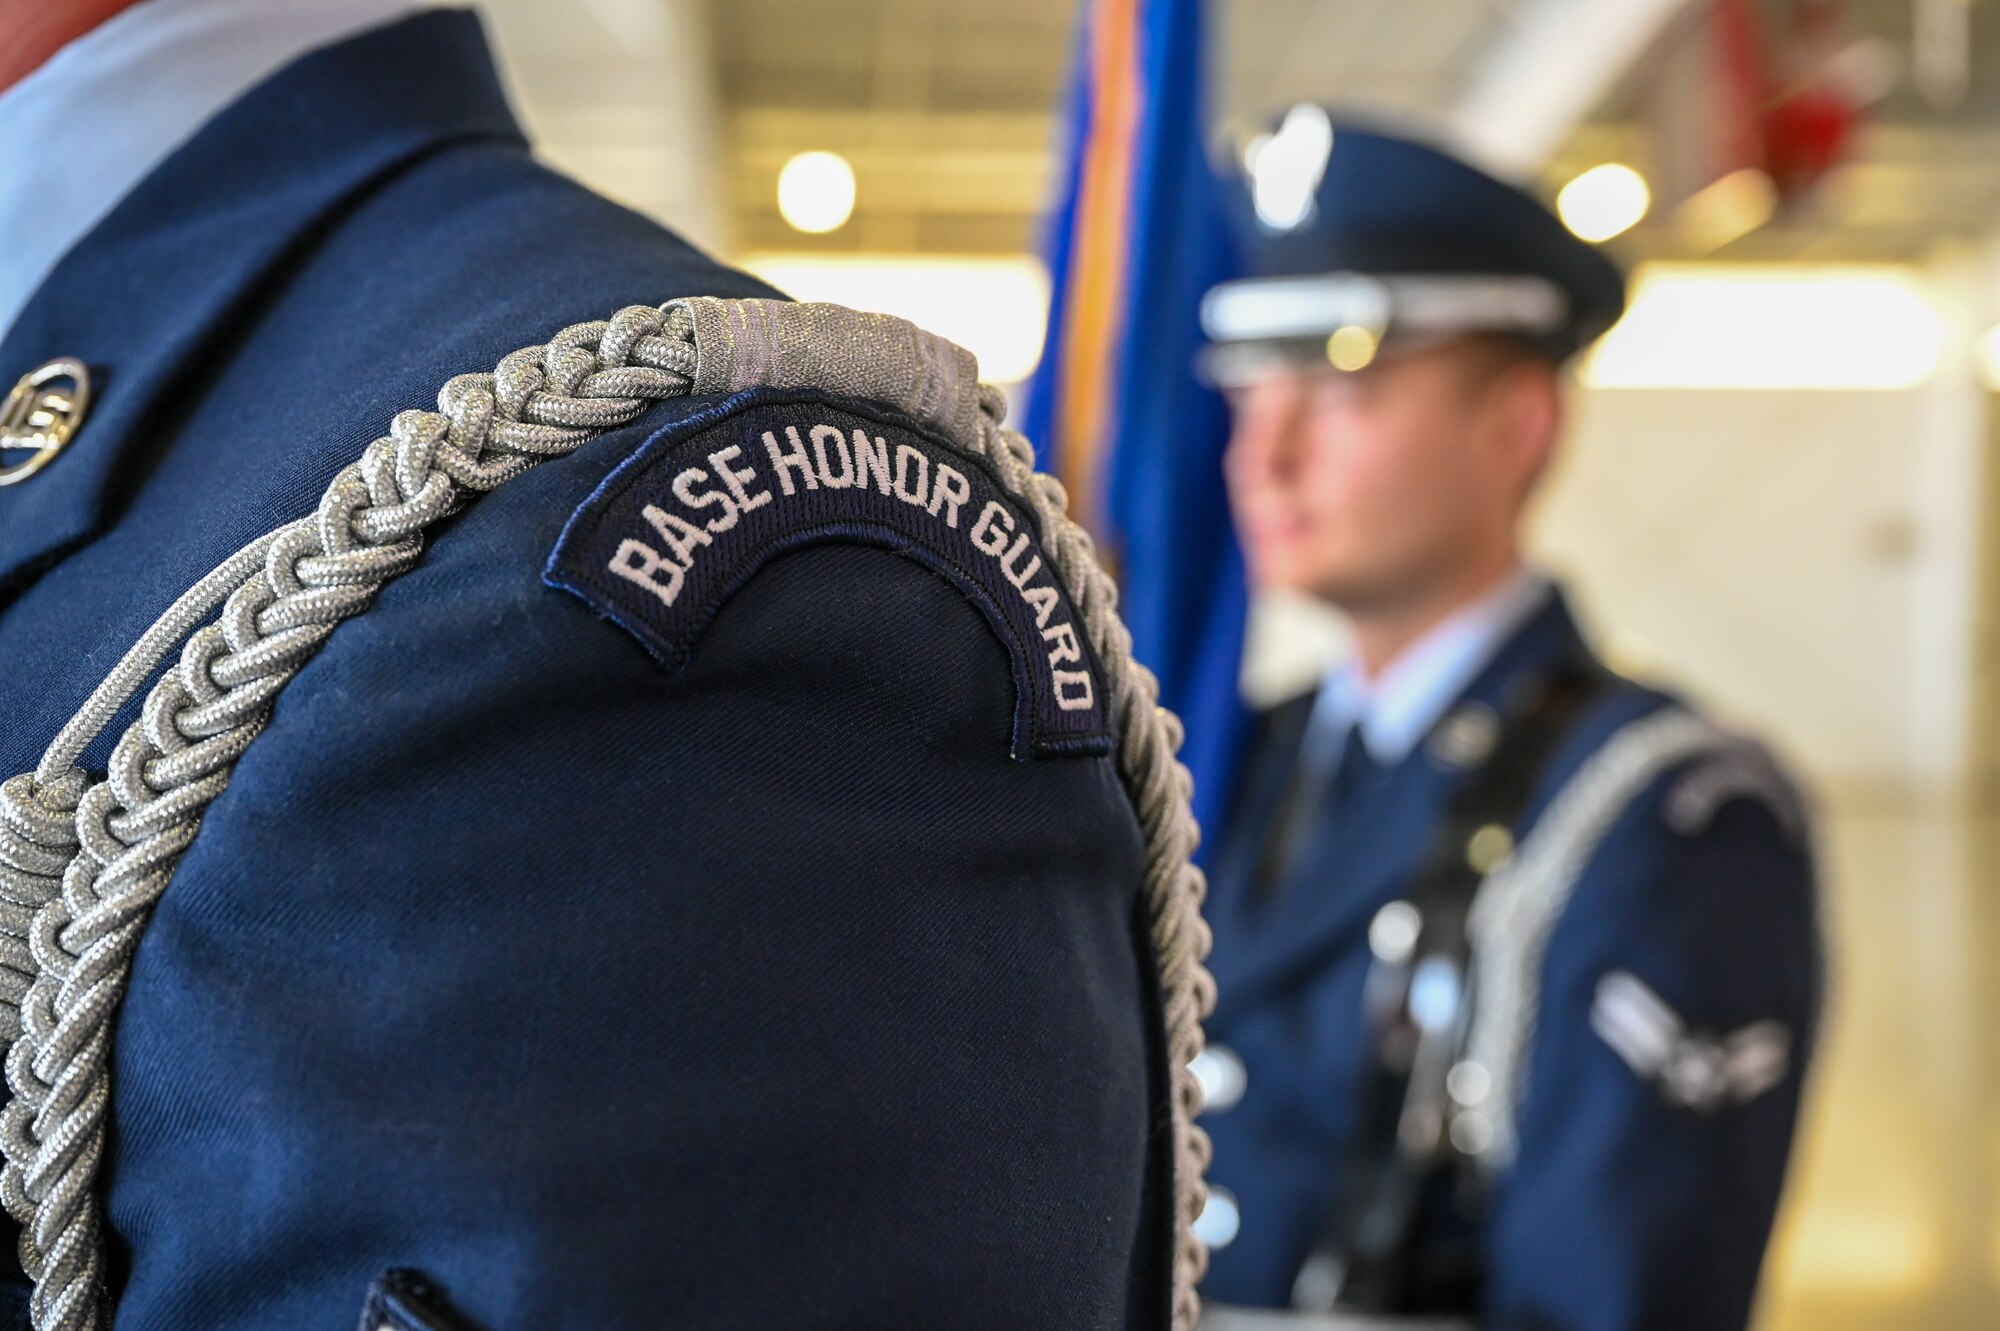 A photo displaying the shoulder of a U.S. Air Force ceremonial Guardsman wearing the “Base Honor Guard” identifier patch along with a silver rope at Laughlin Air Force Base, Texas, on July 7, 2022. The Air Force Honor Guard silver rope symbolizes the high level of proficiency and dedication required to be a member of the Air Force Honor Guard. (U.S. Air Force photo by Airman 1st Class Keira Rossman)